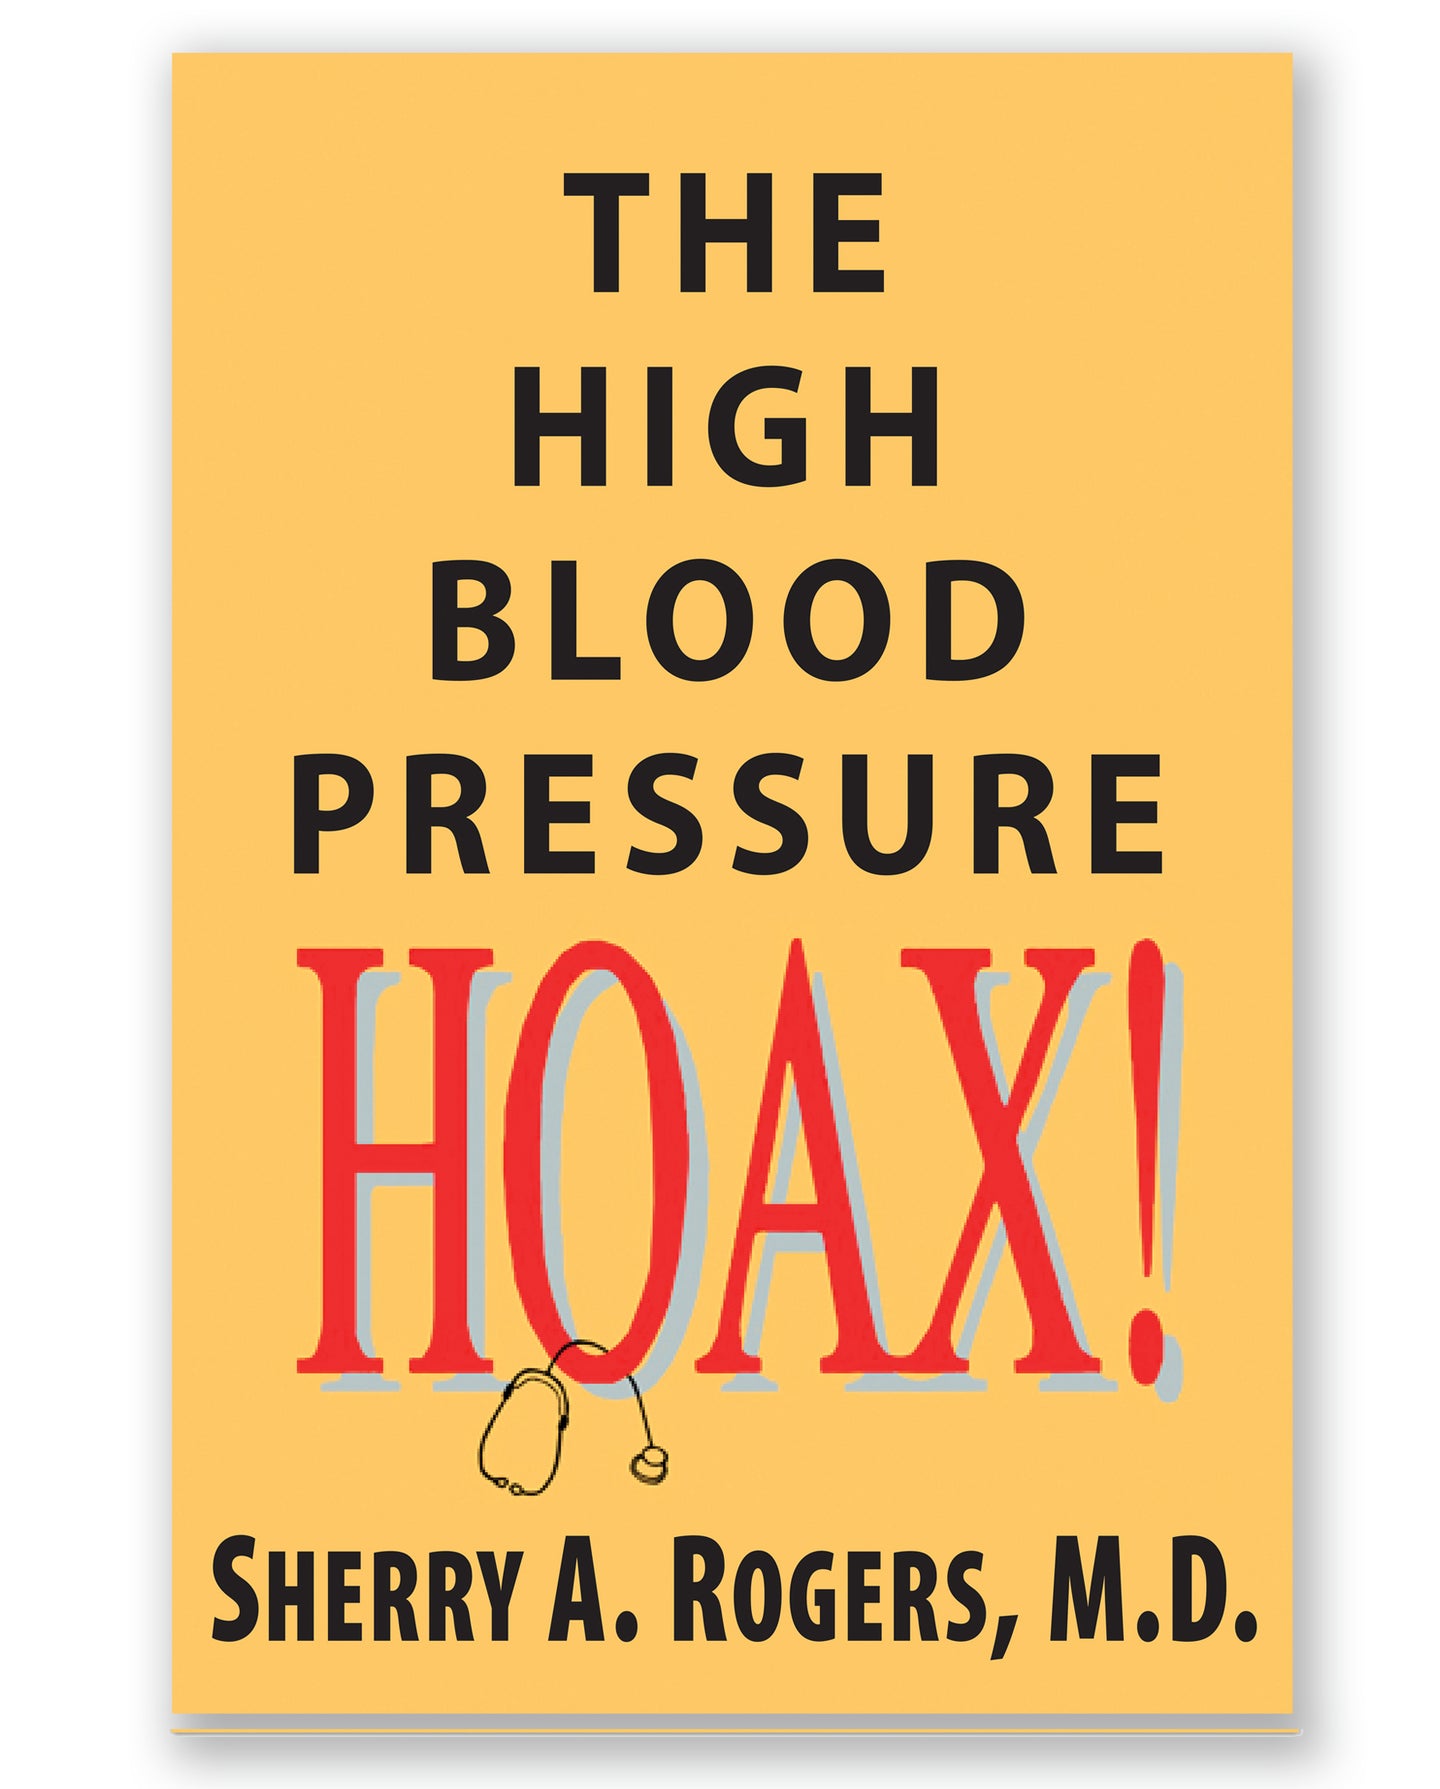 The High Blood Pressure Hoax! by Sherry A. Rogers, M.D.